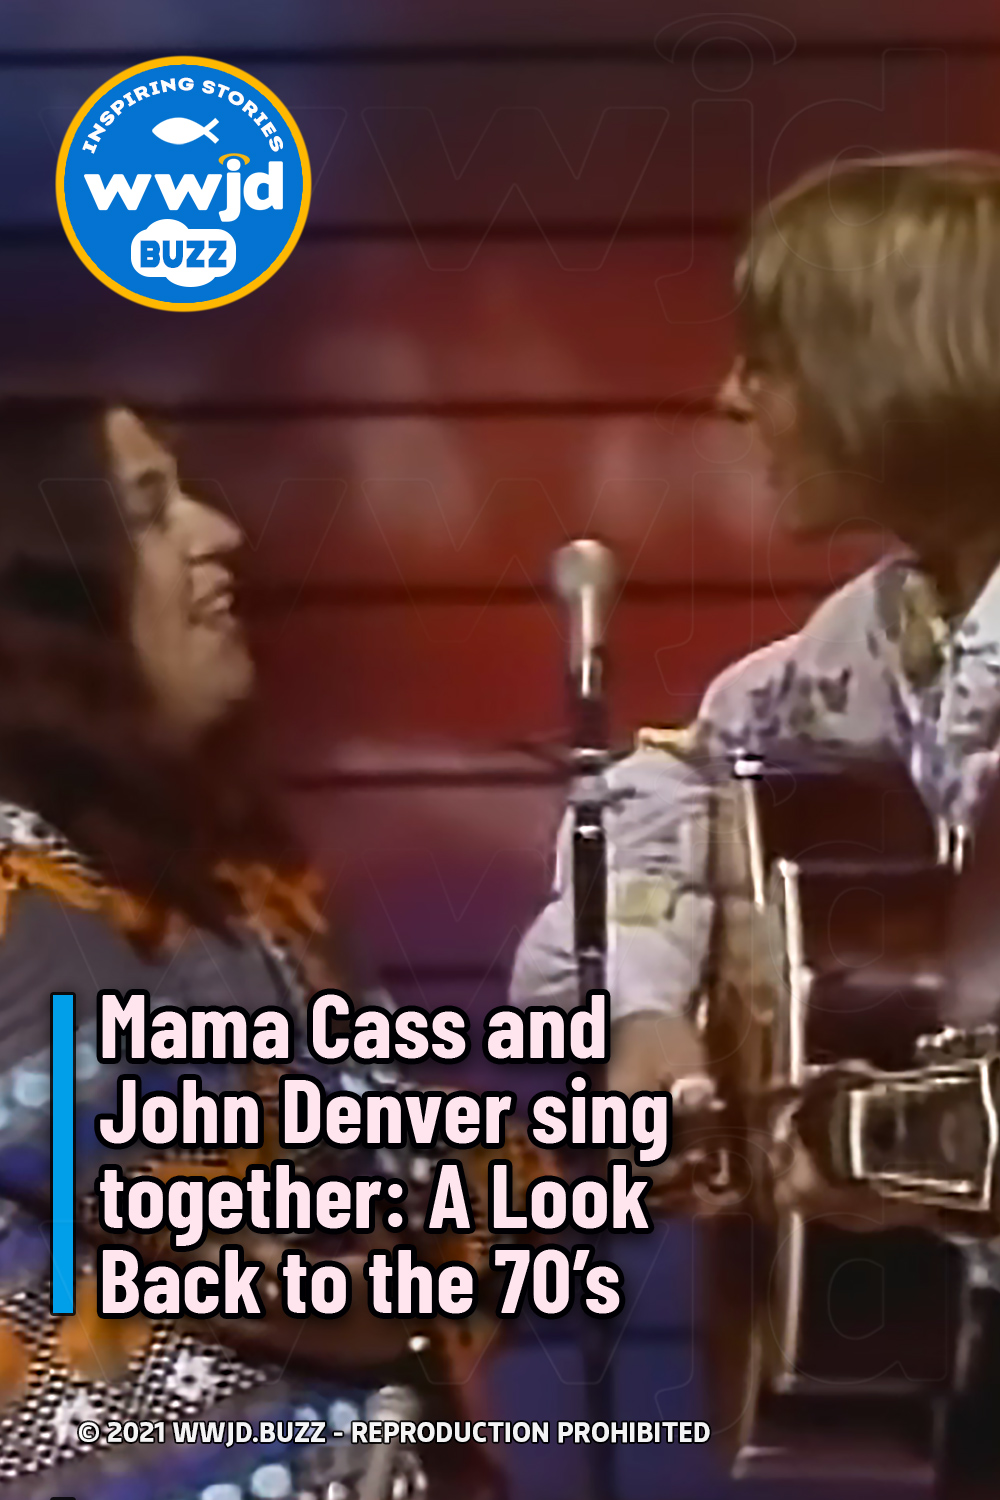 Mama Cass and John Denver sing together: A Look Back to the 70’s